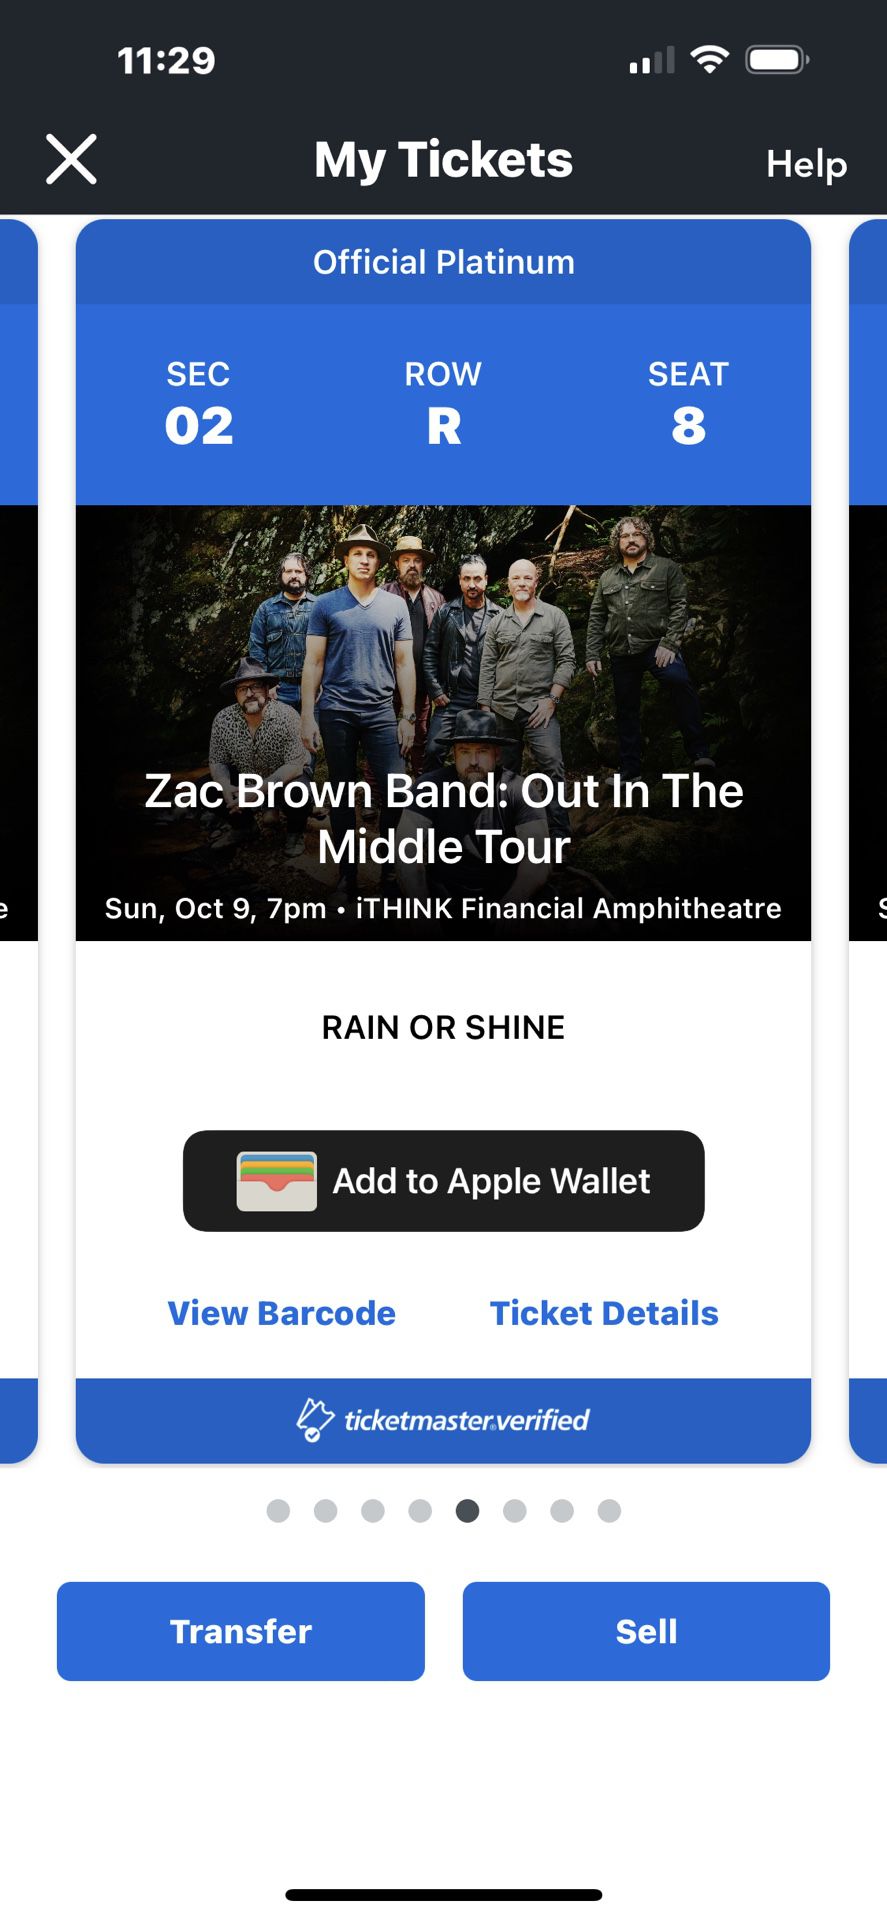 Zac Brown Band Tickets Section 2. 9 Rows From Stage 